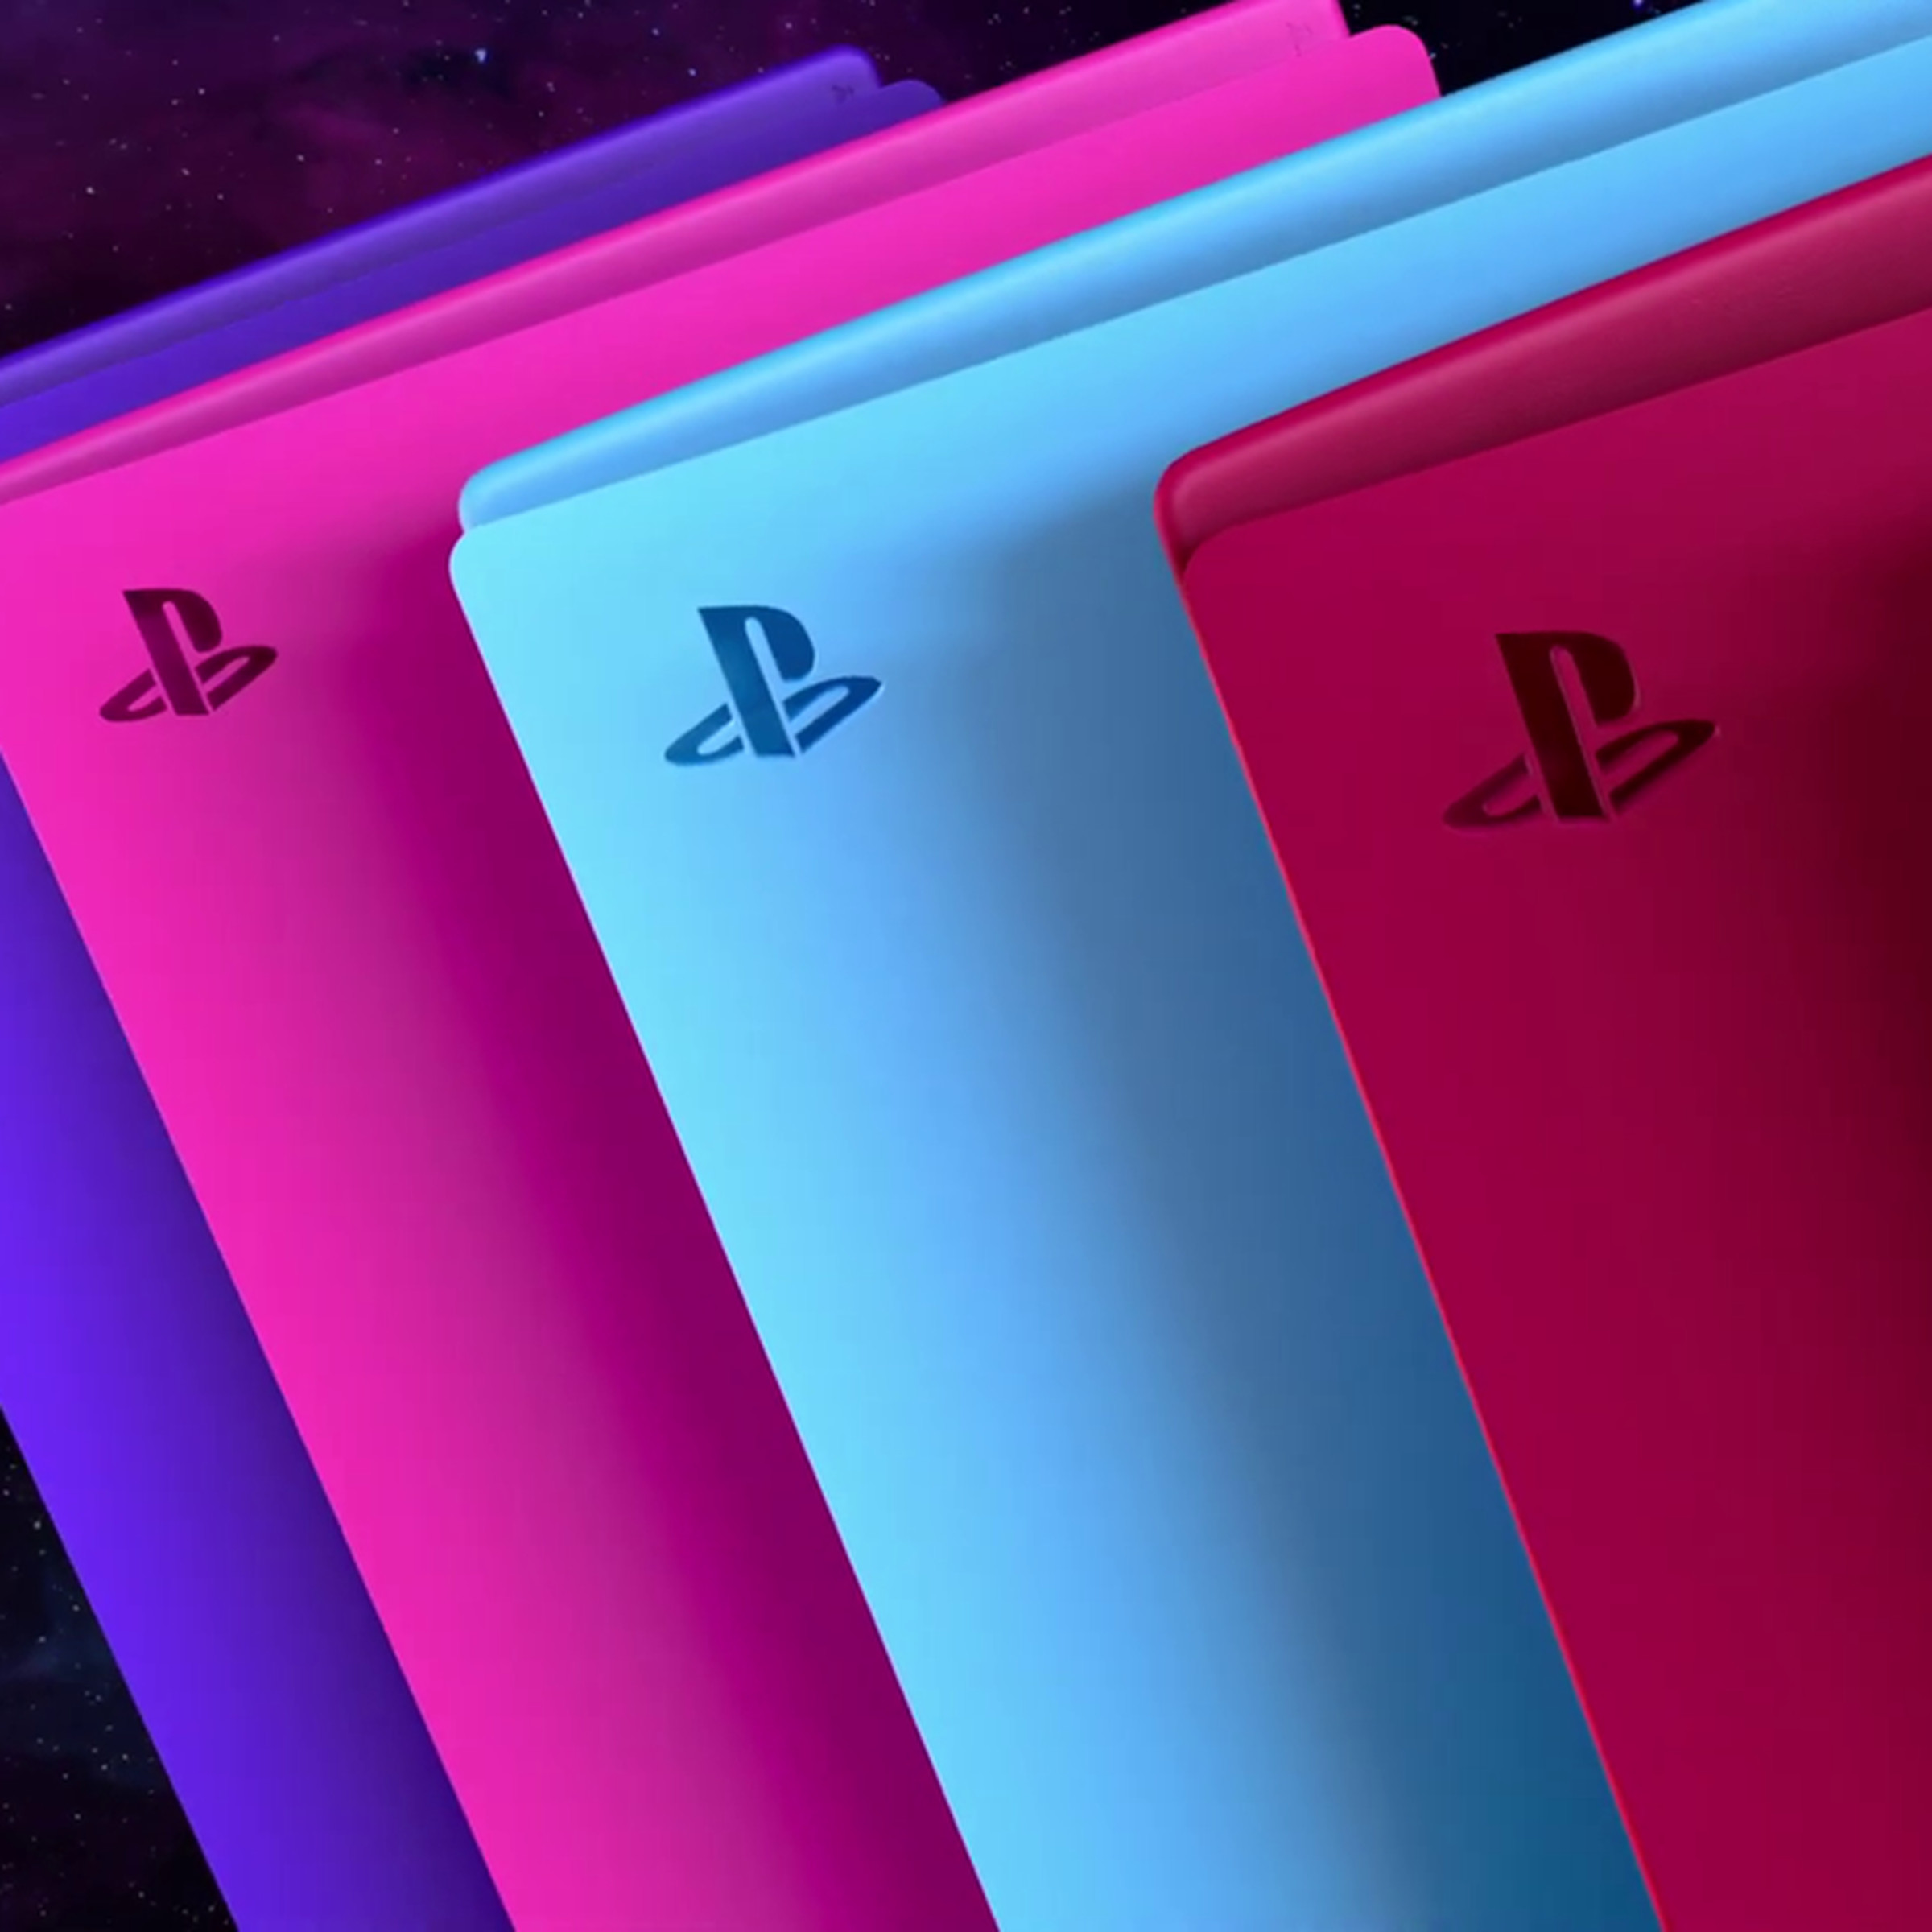 A render of the colorful replacement console covers for the PlayStation 5. From left to right: purple, pink, blue, red, and black.